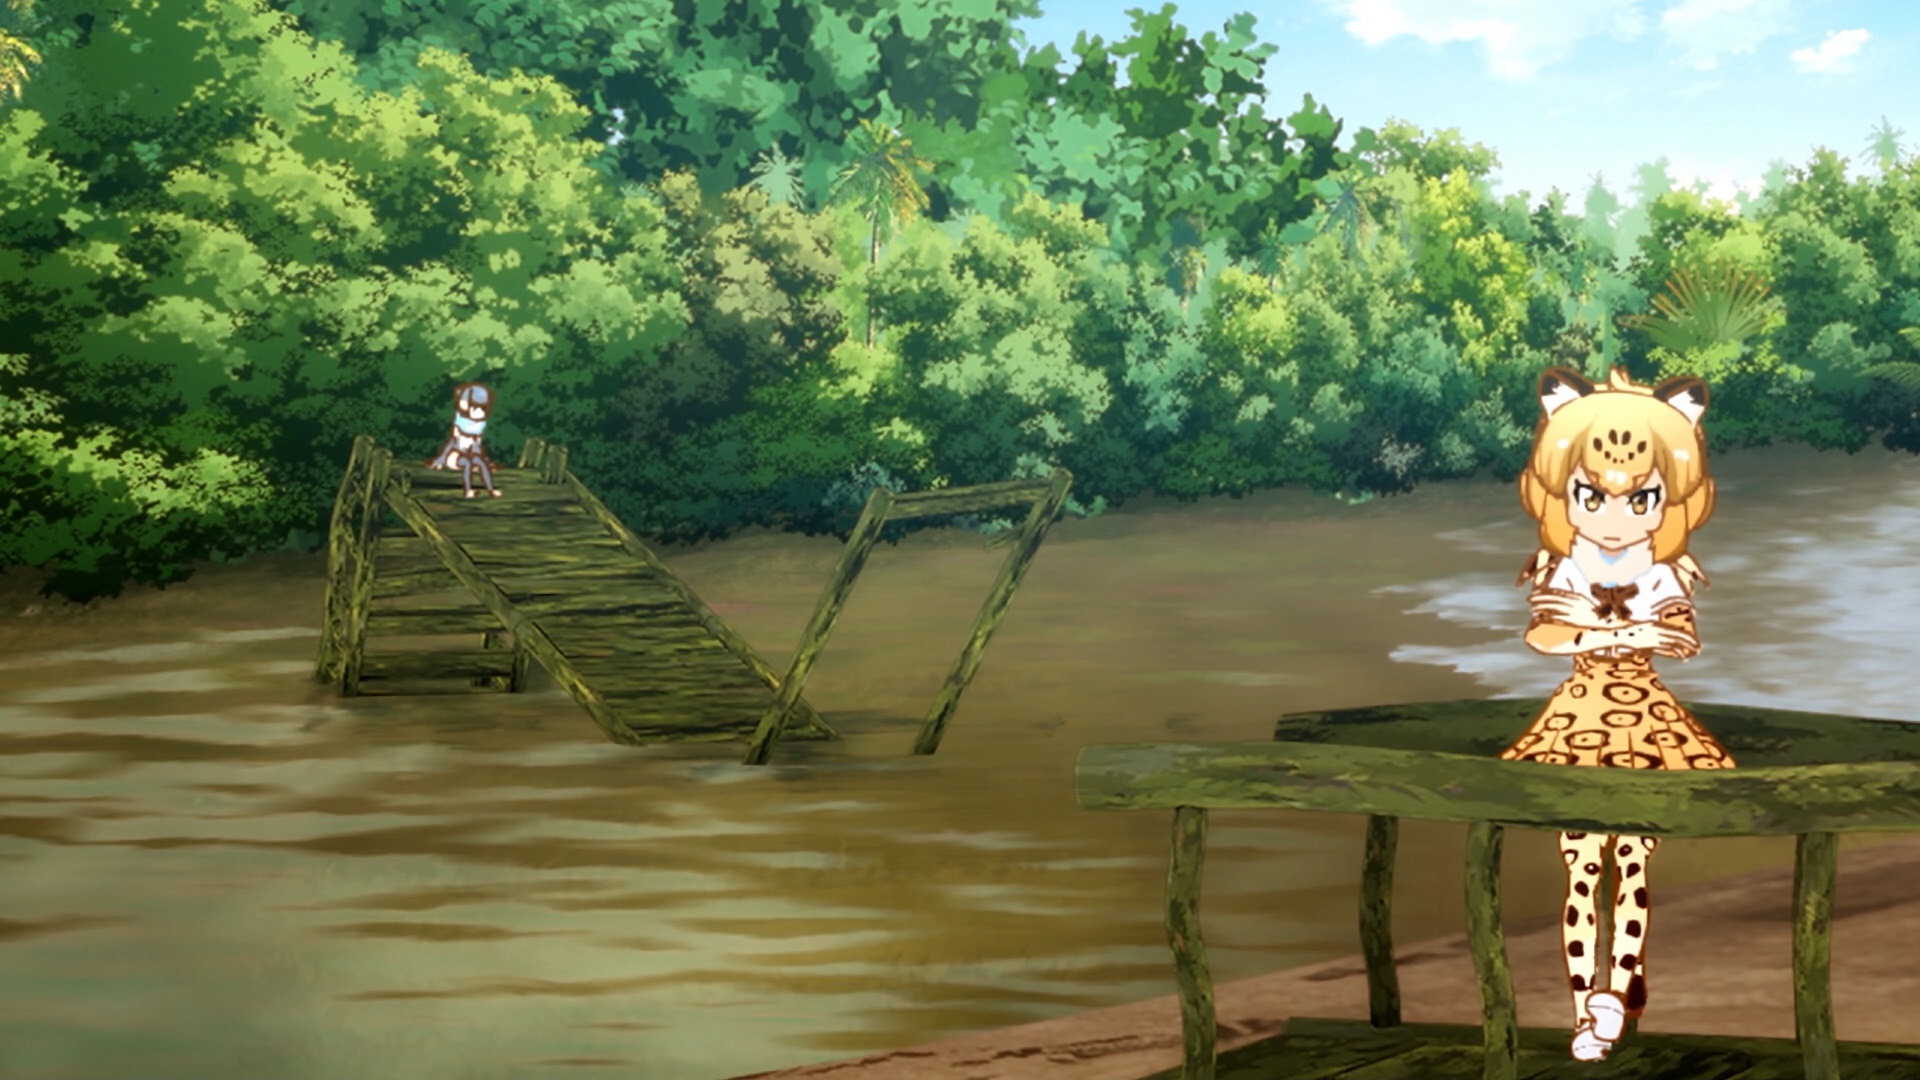 A Jungle Area in OP from Anime Season 1.